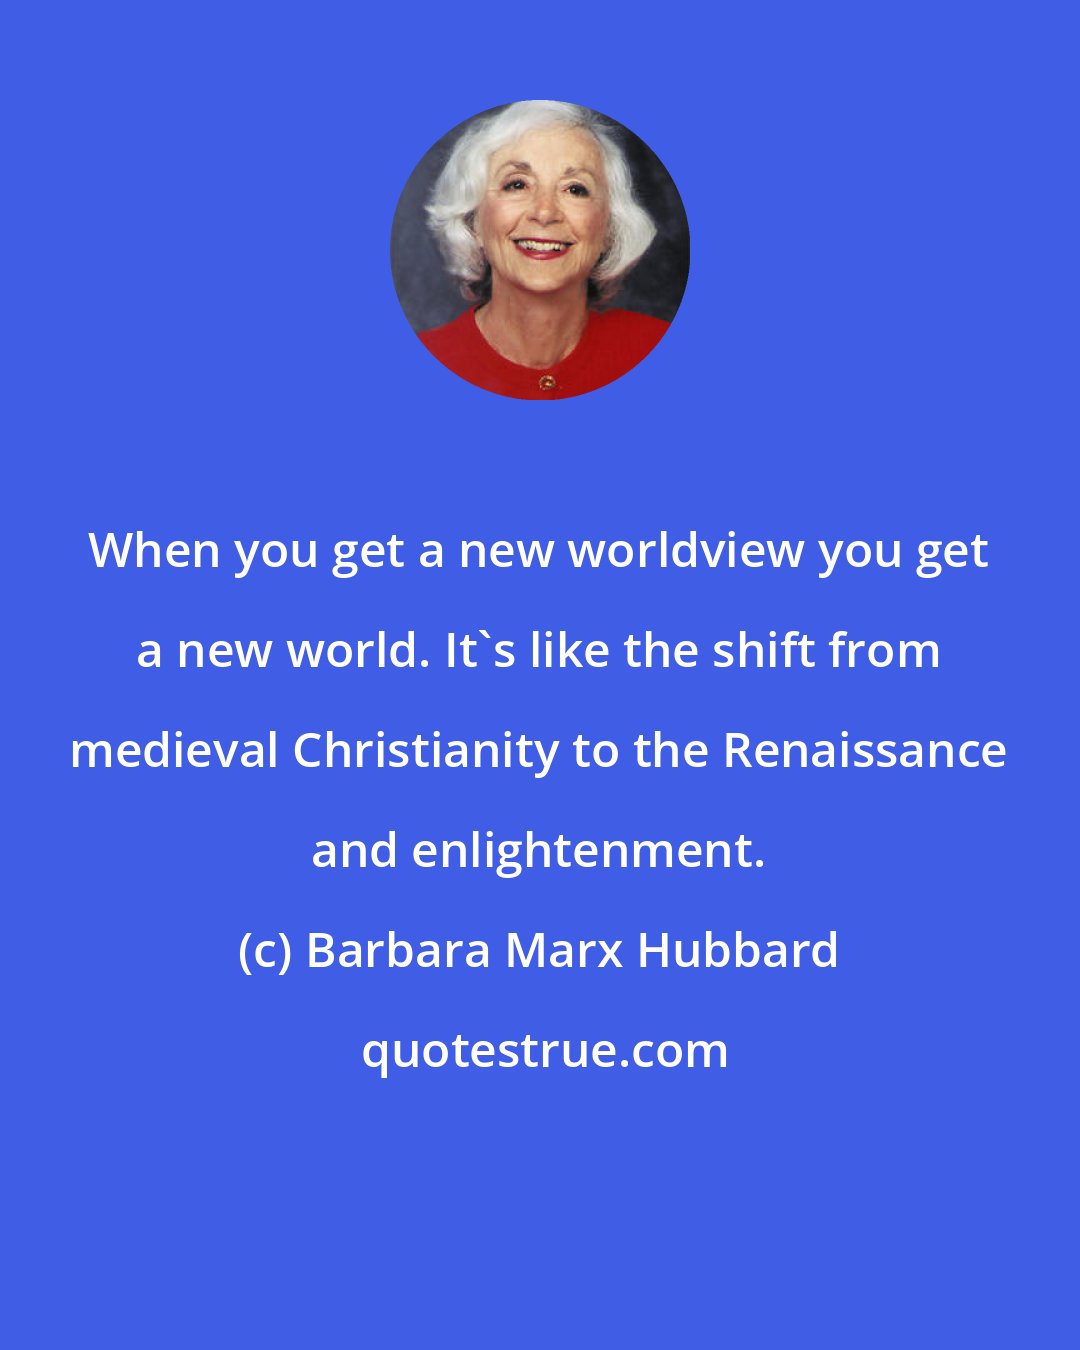 Barbara Marx Hubbard: When you get a new worldview you get a new world. It's like the shift from medieval Christianity to the Renaissance and enlightenment.